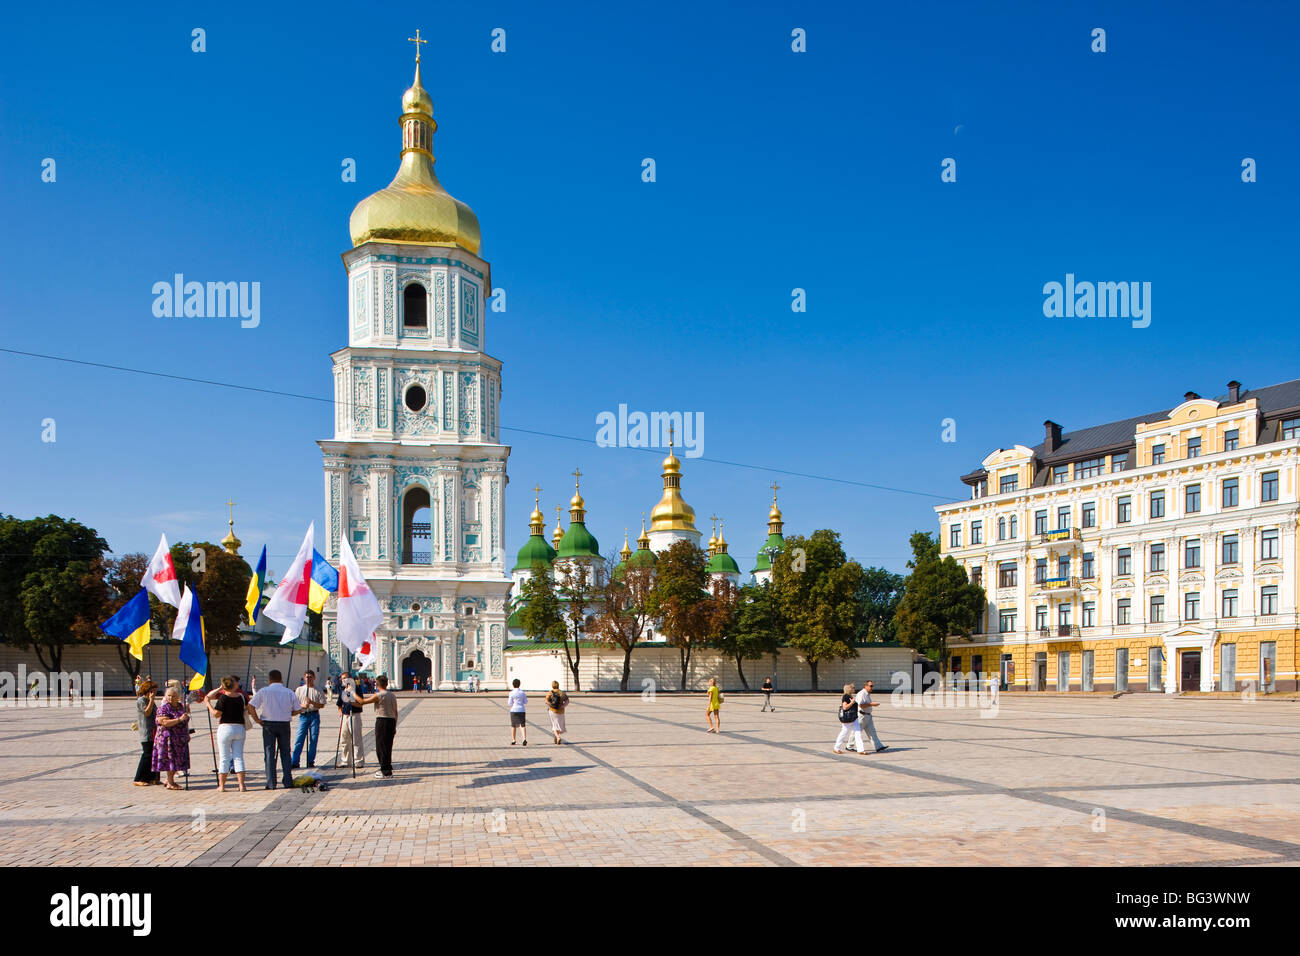 Independence Day, Ukrainian national flags in the square outside St. Sophia Cathedral, UNESCO World Heritage Site, Kiev, Ukraine Stock Photo